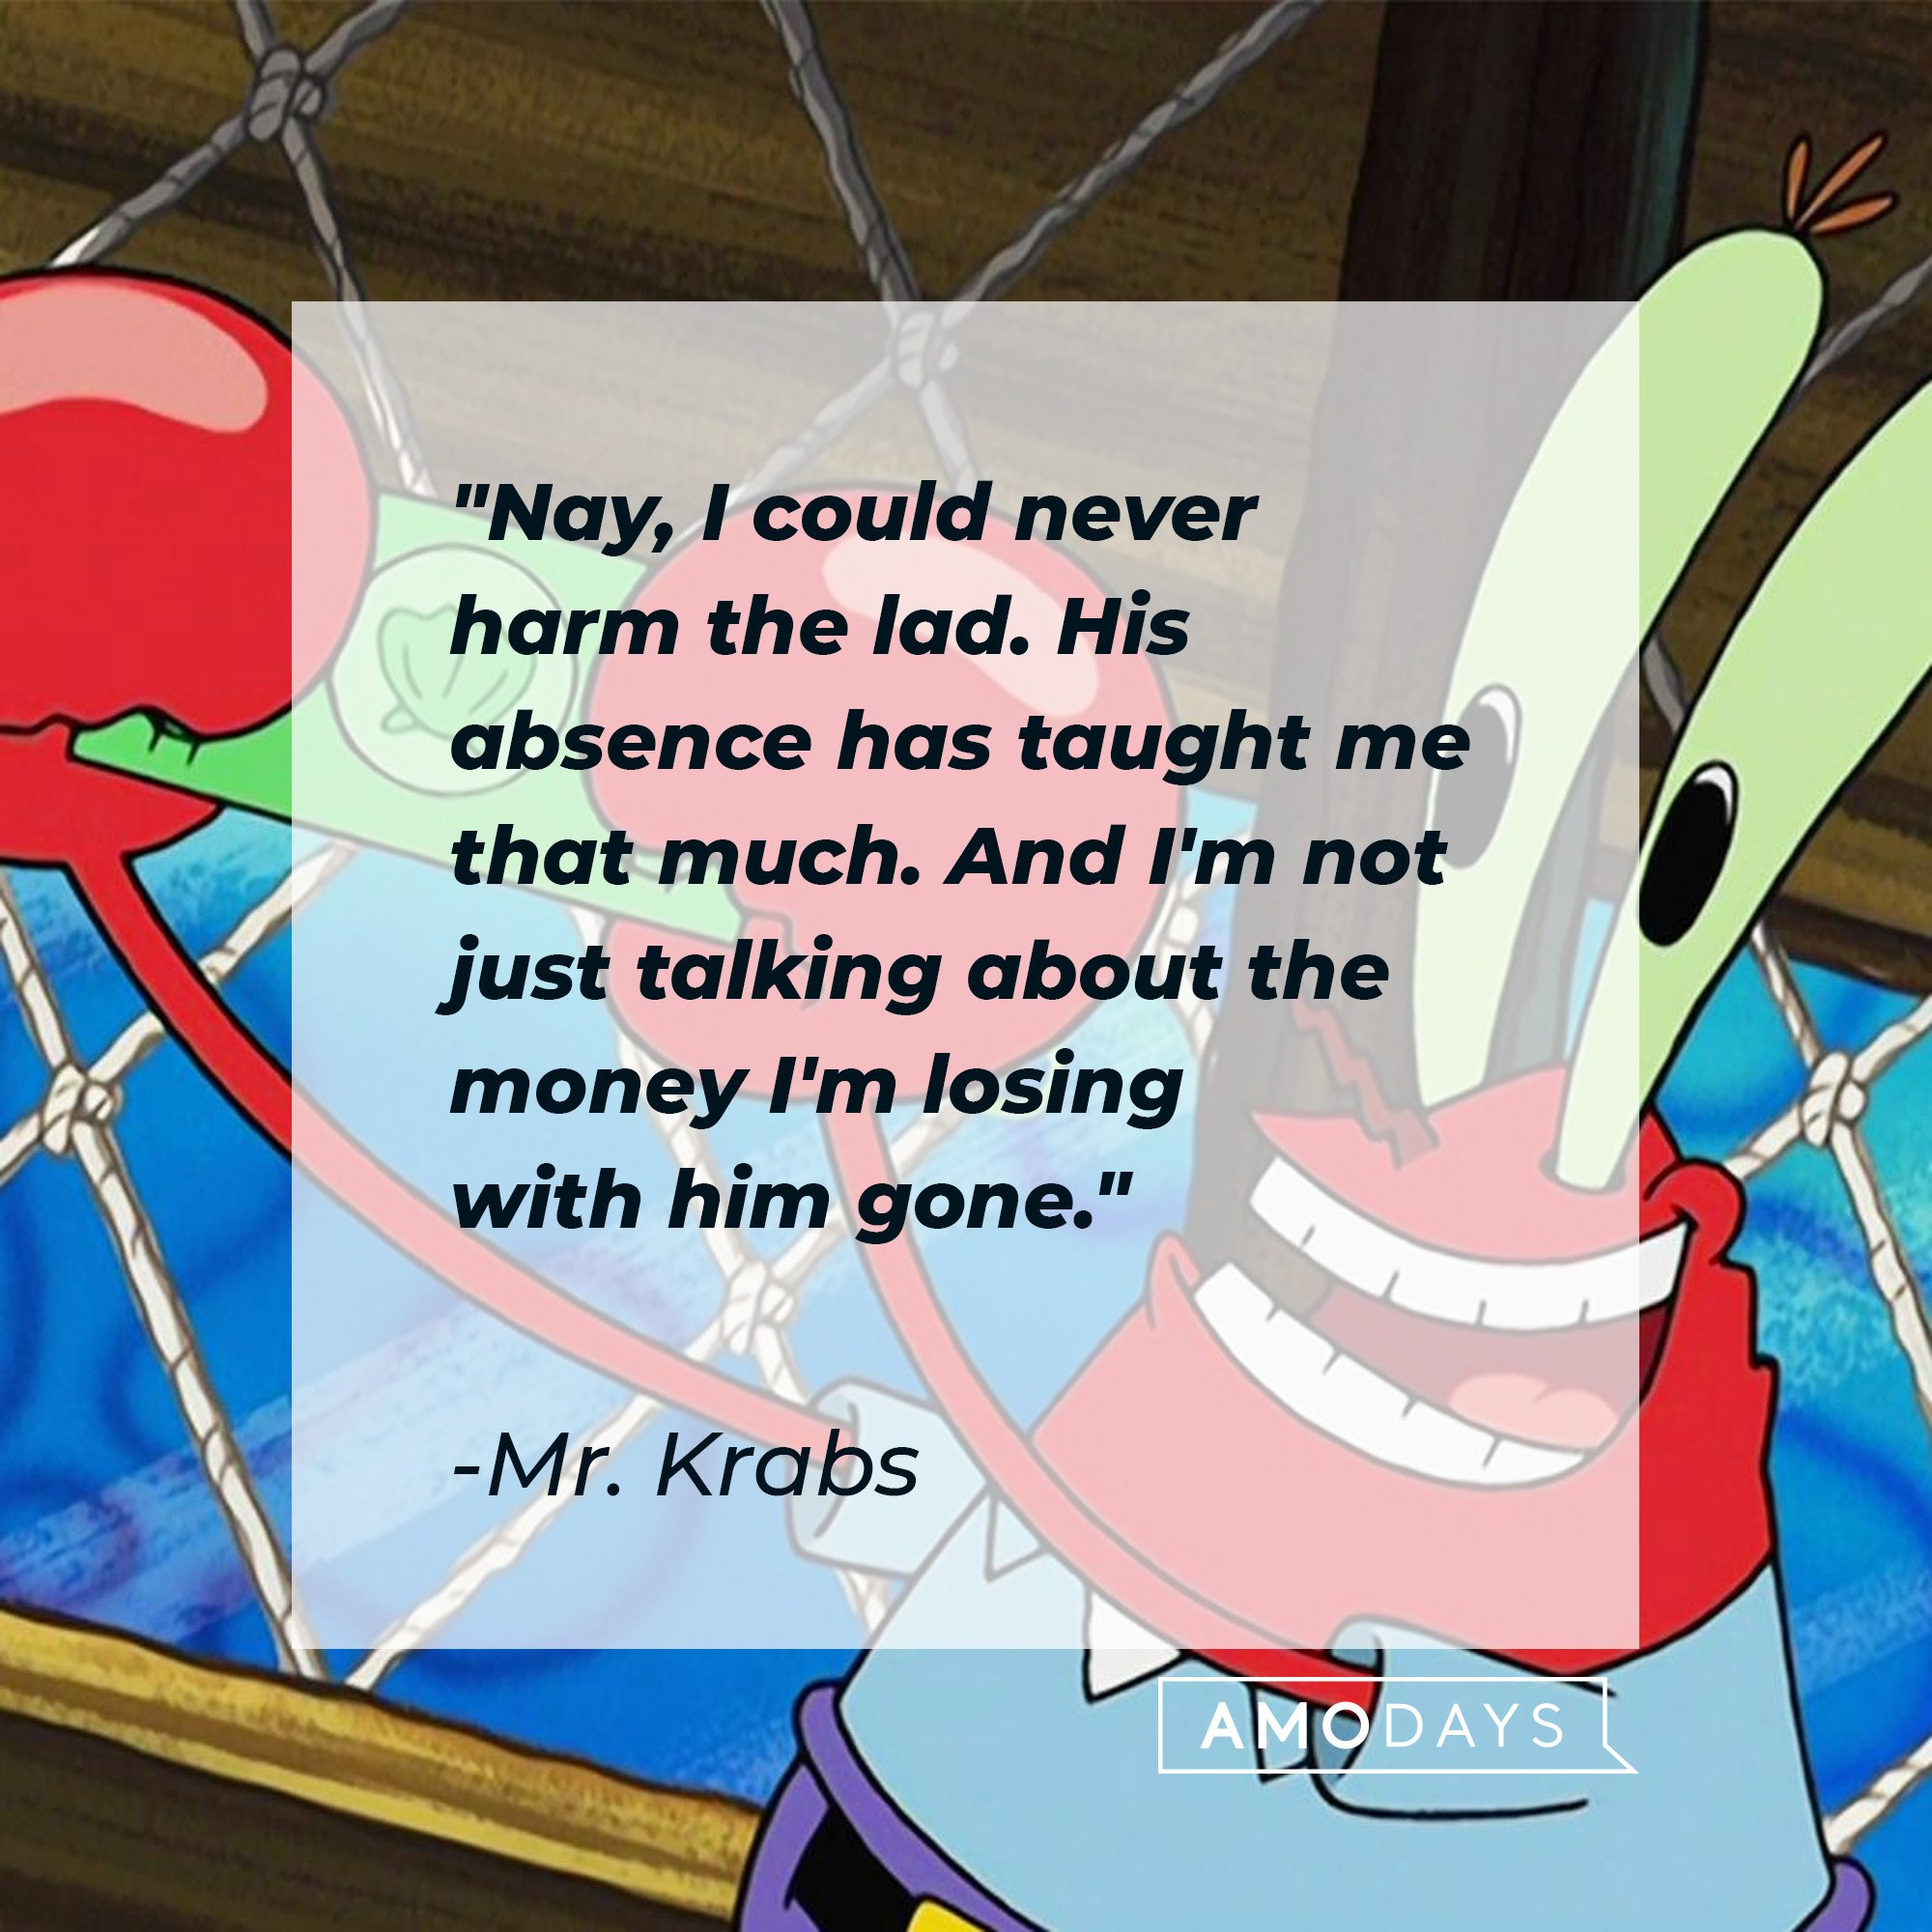 Mr. Krabs's quote: "Nay, I could never harm the lad. His absence has taught me that much. And I'm not just talking about the money I'm losing with him gone." | Image: AmoDays 